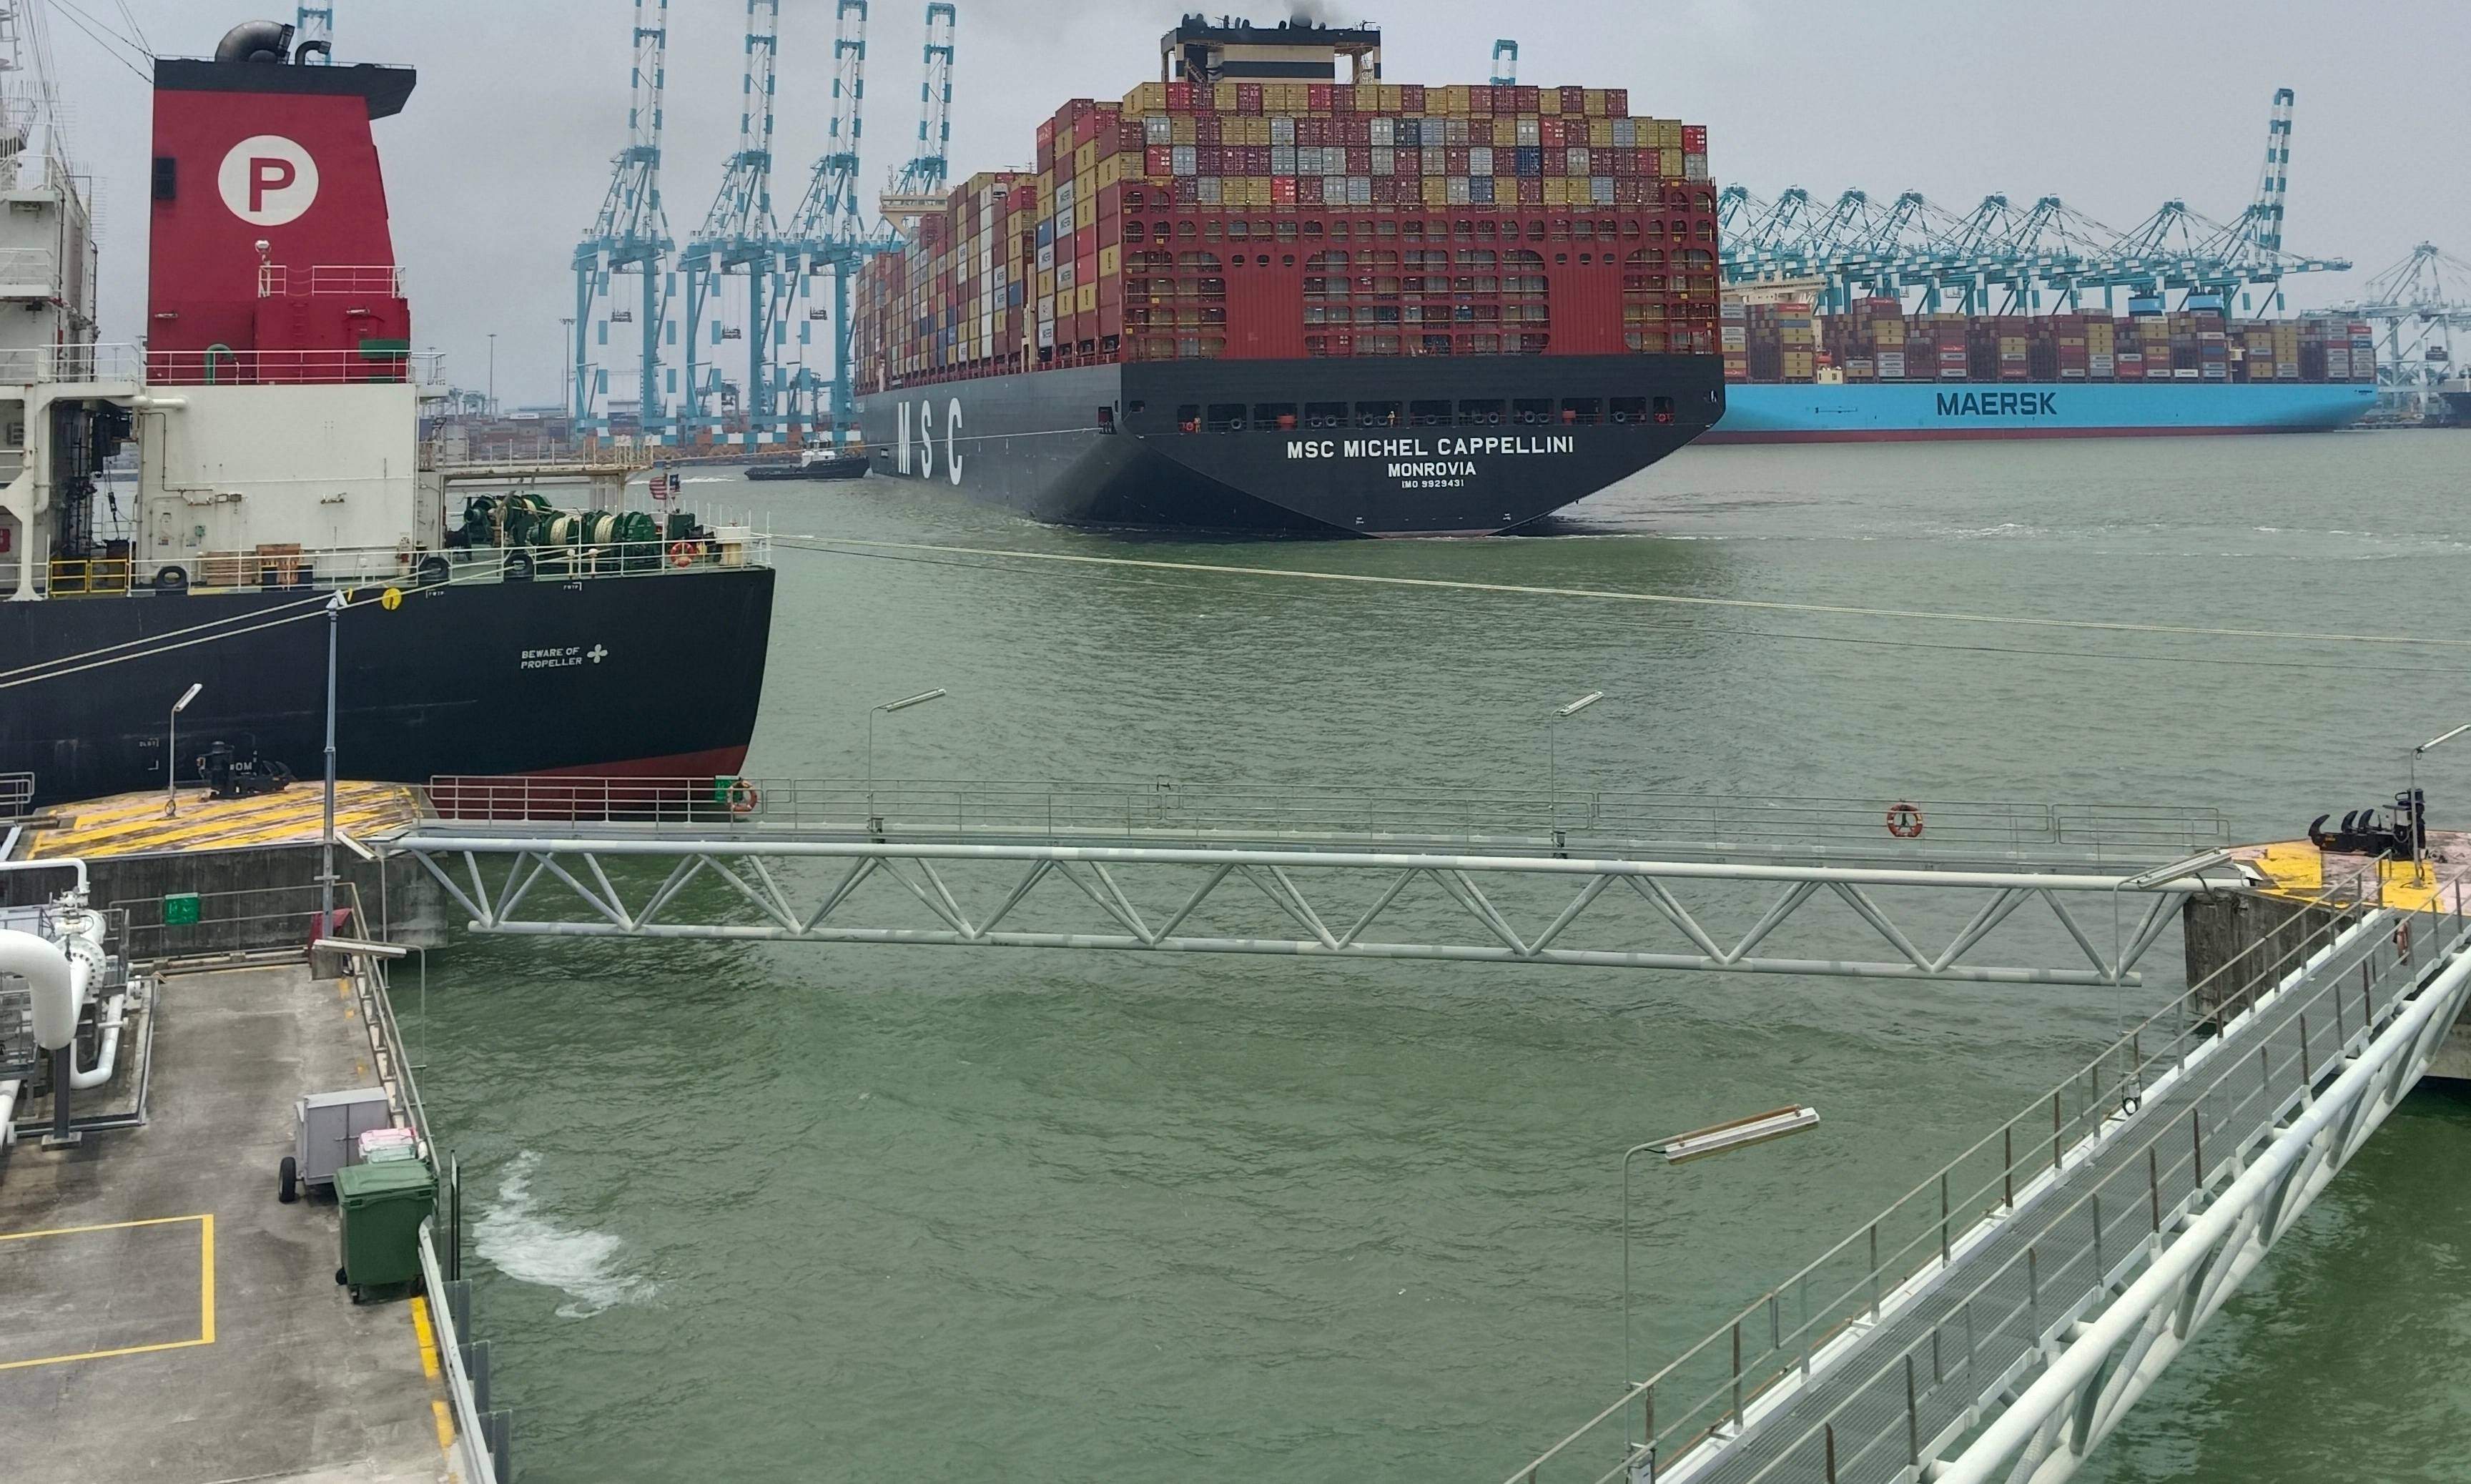 <p>With the combination of these three mega-ships, the MSC company can ship 22.5 million TEU every year, combined with its fleet of over 700 ships of all sizes.</p>  <p>MSC currently holds the record for largest shipping vessel in the world.</p>